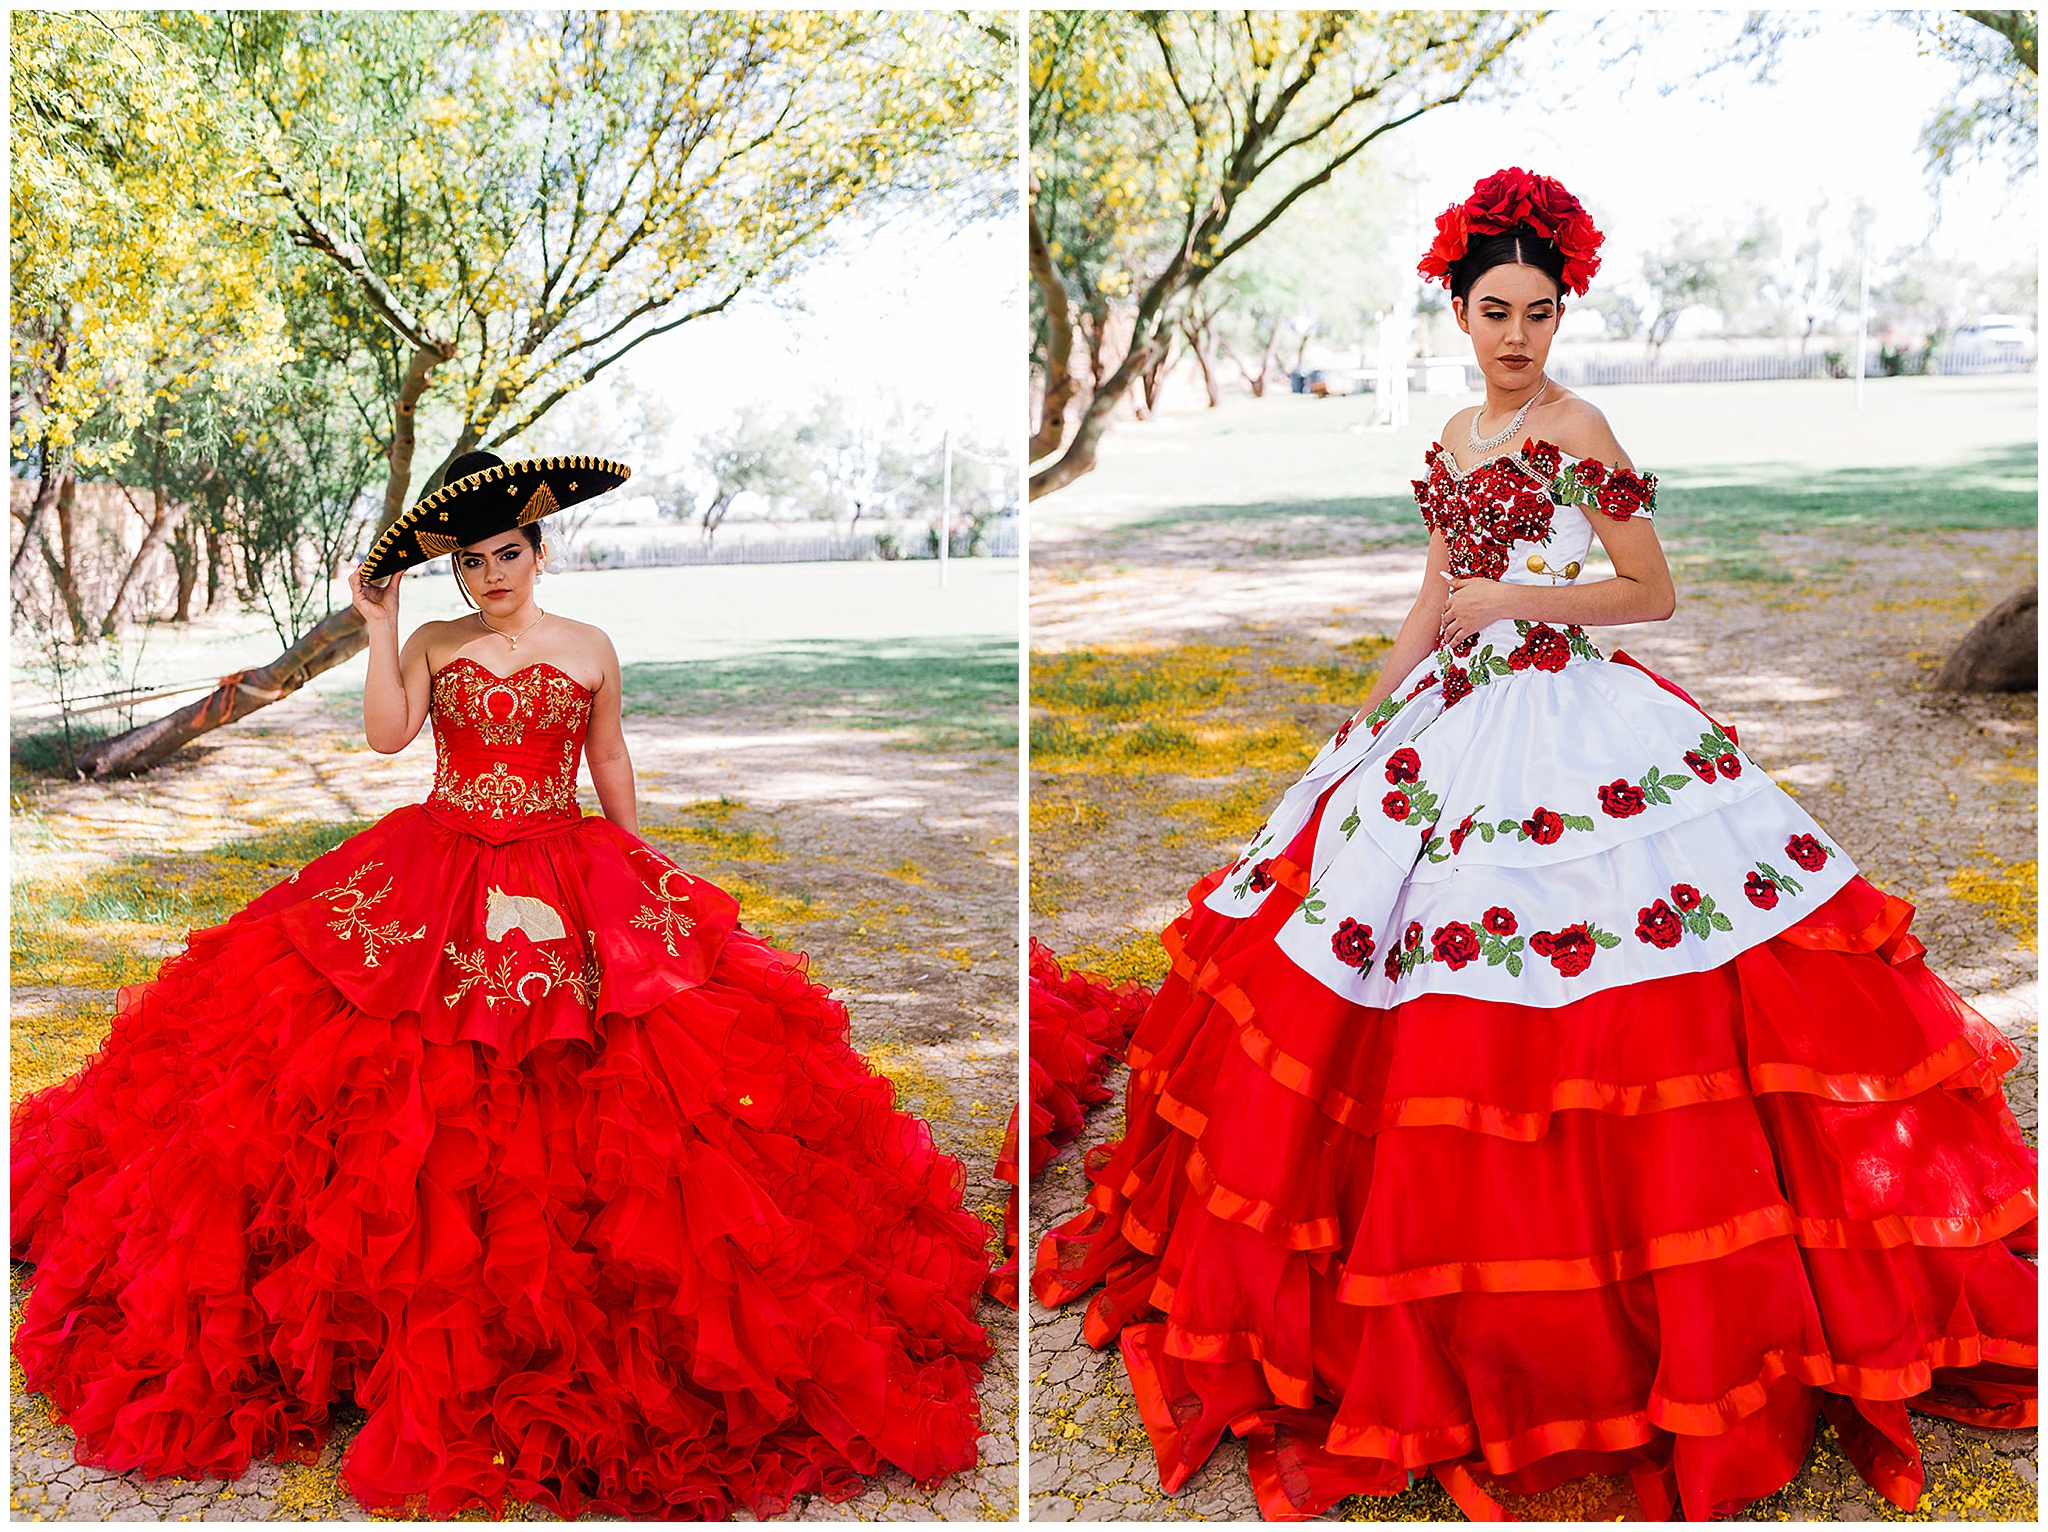 Teenagers stand in large red embroidered ball gowns outside under trees